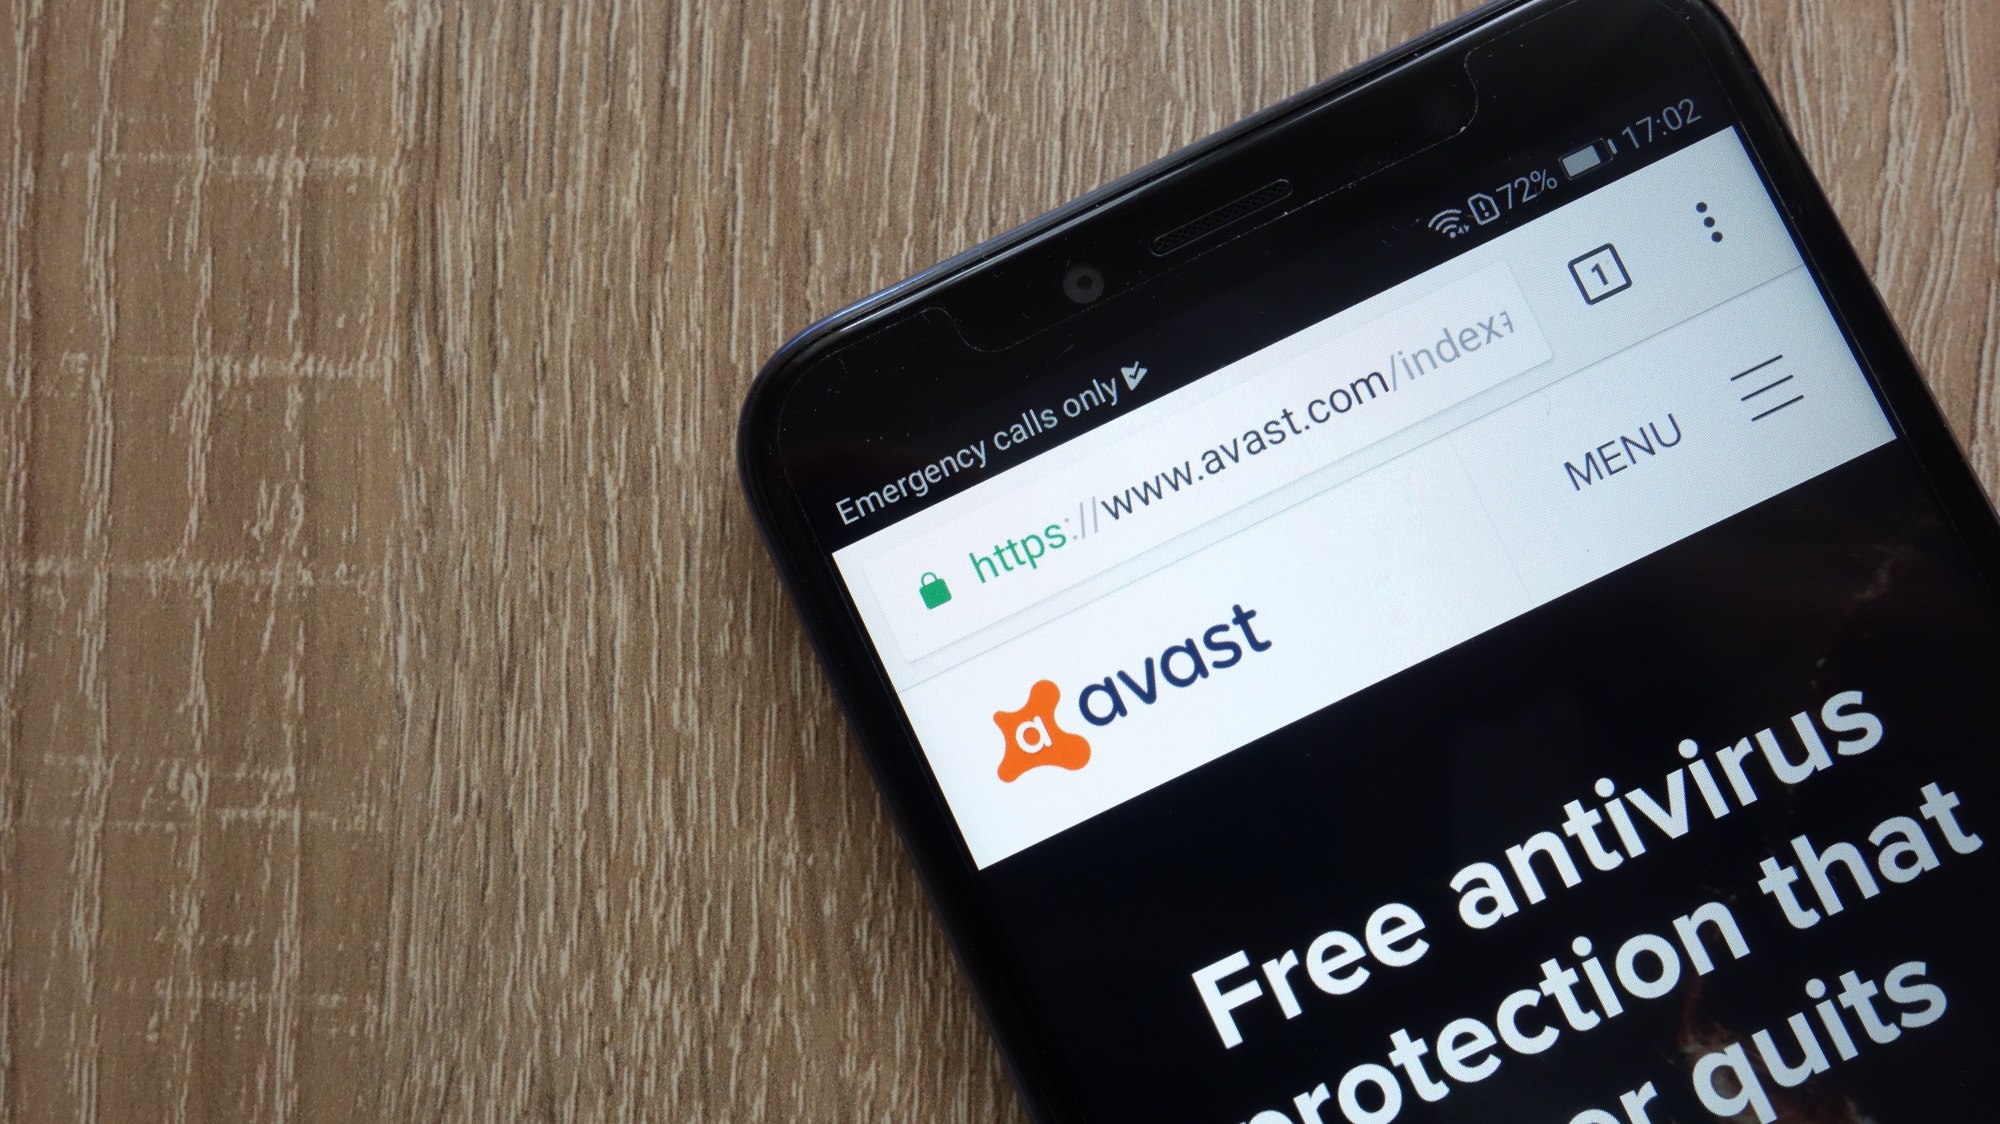 avast ultimate internet security suite on a mobile